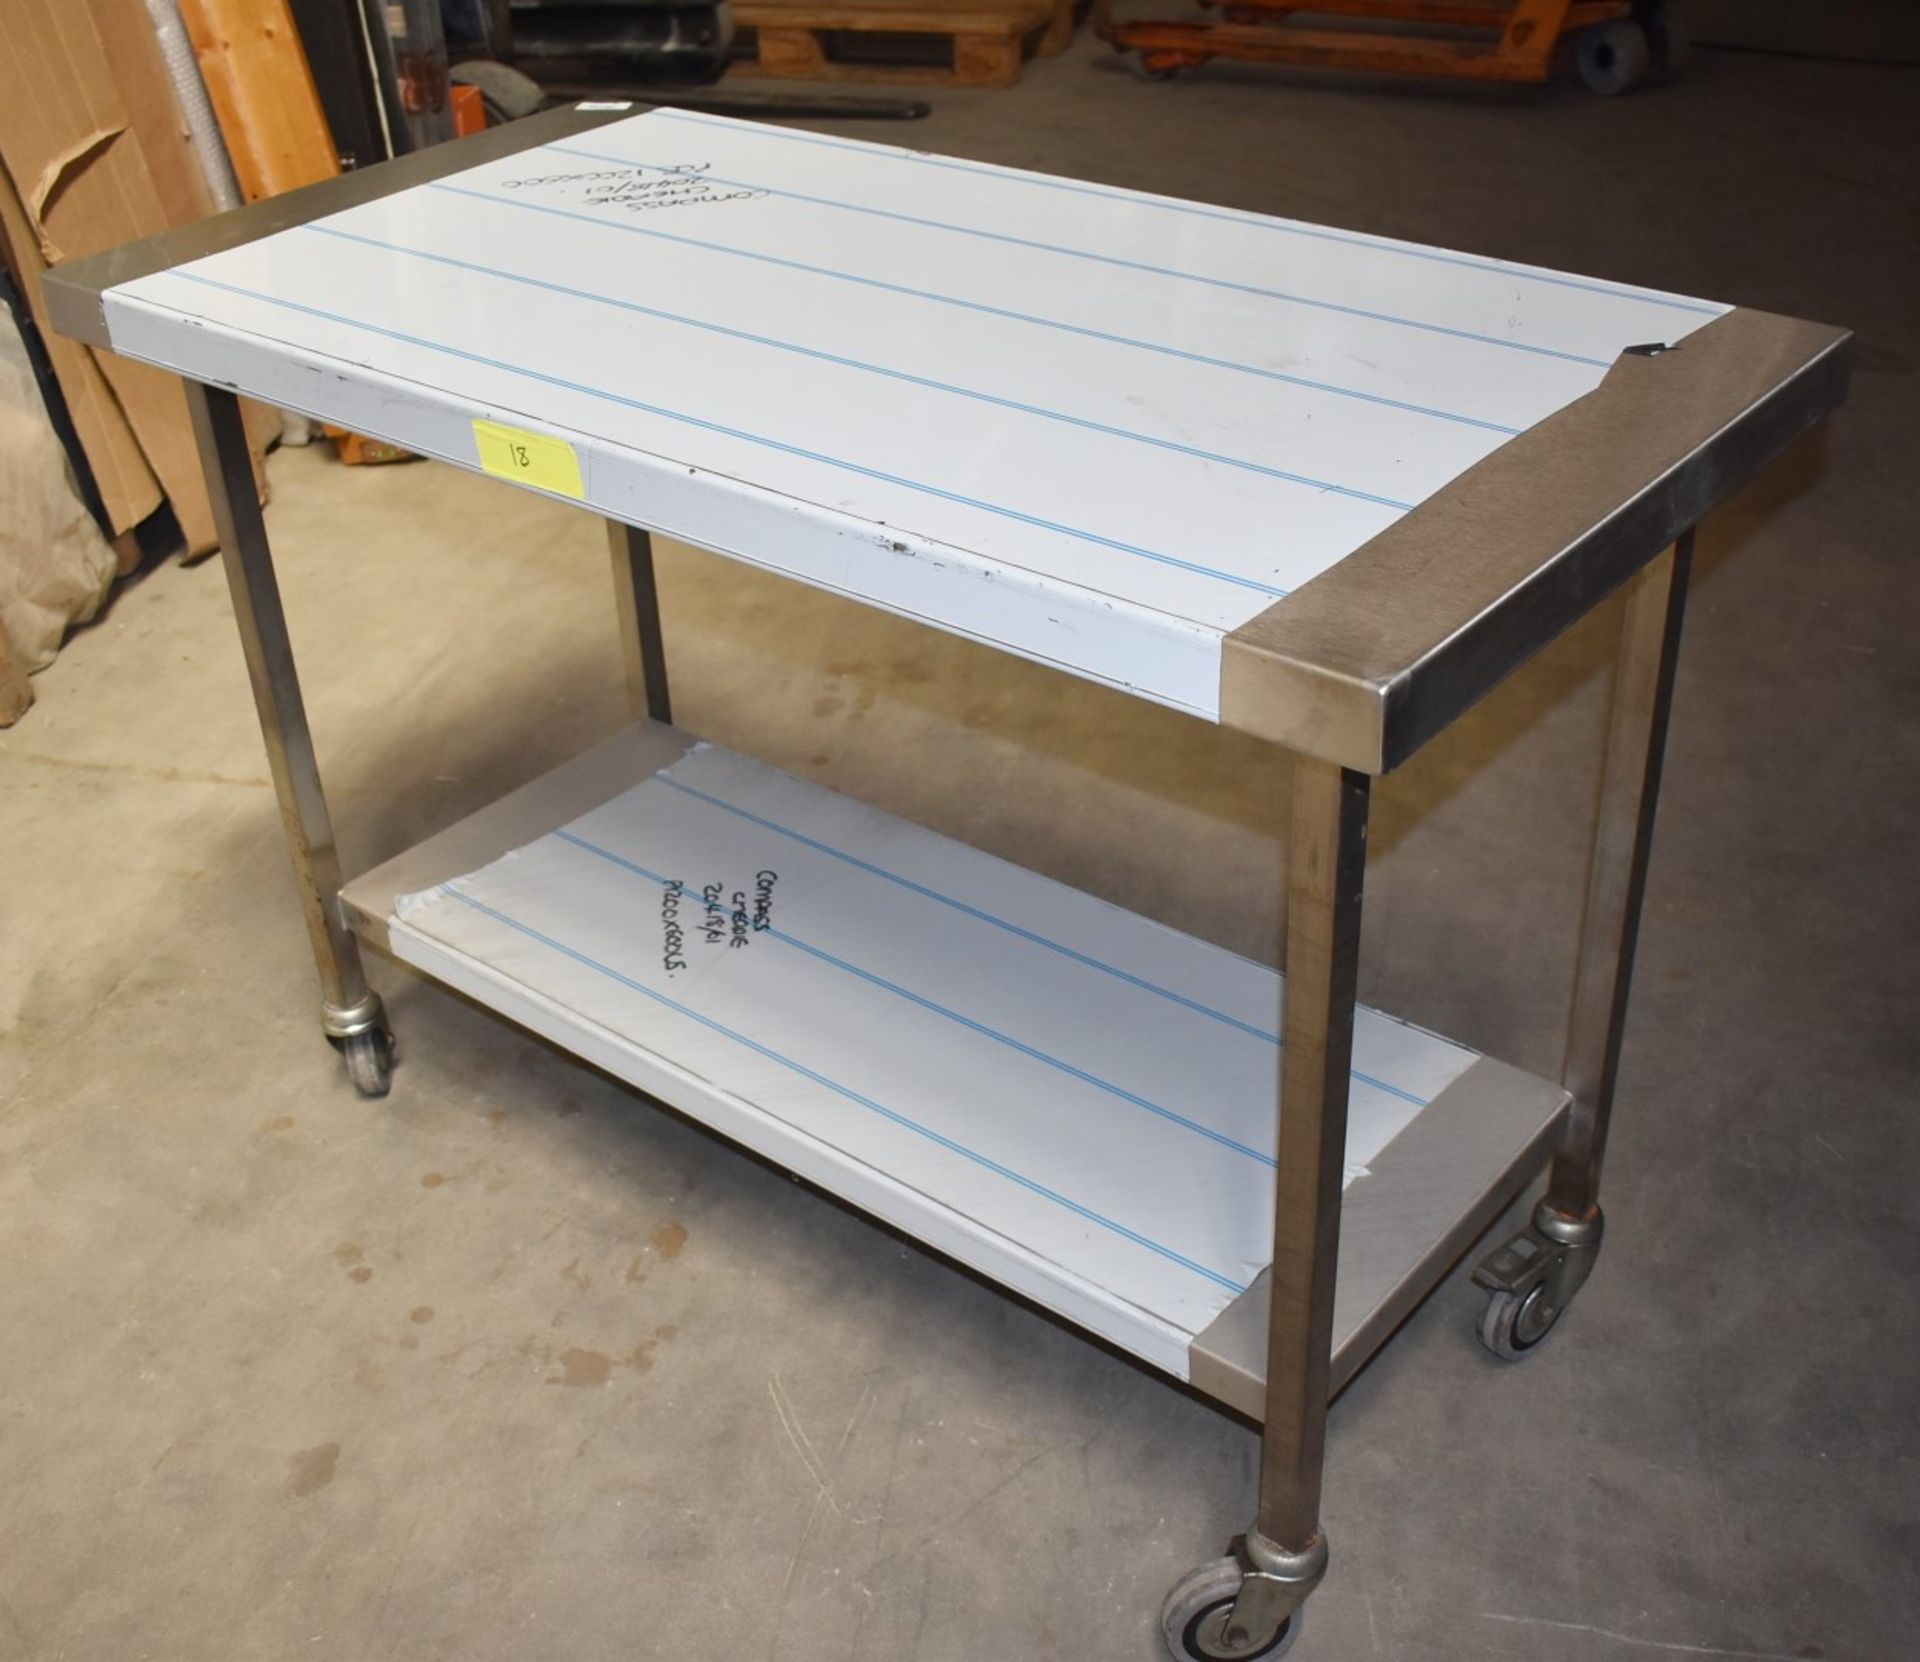 1 x Grundy Mobile Stainless Steel Prep Table With Undershelf - Size H85 x W120 x D60 cms - Ref JP145 - Image 6 of 6